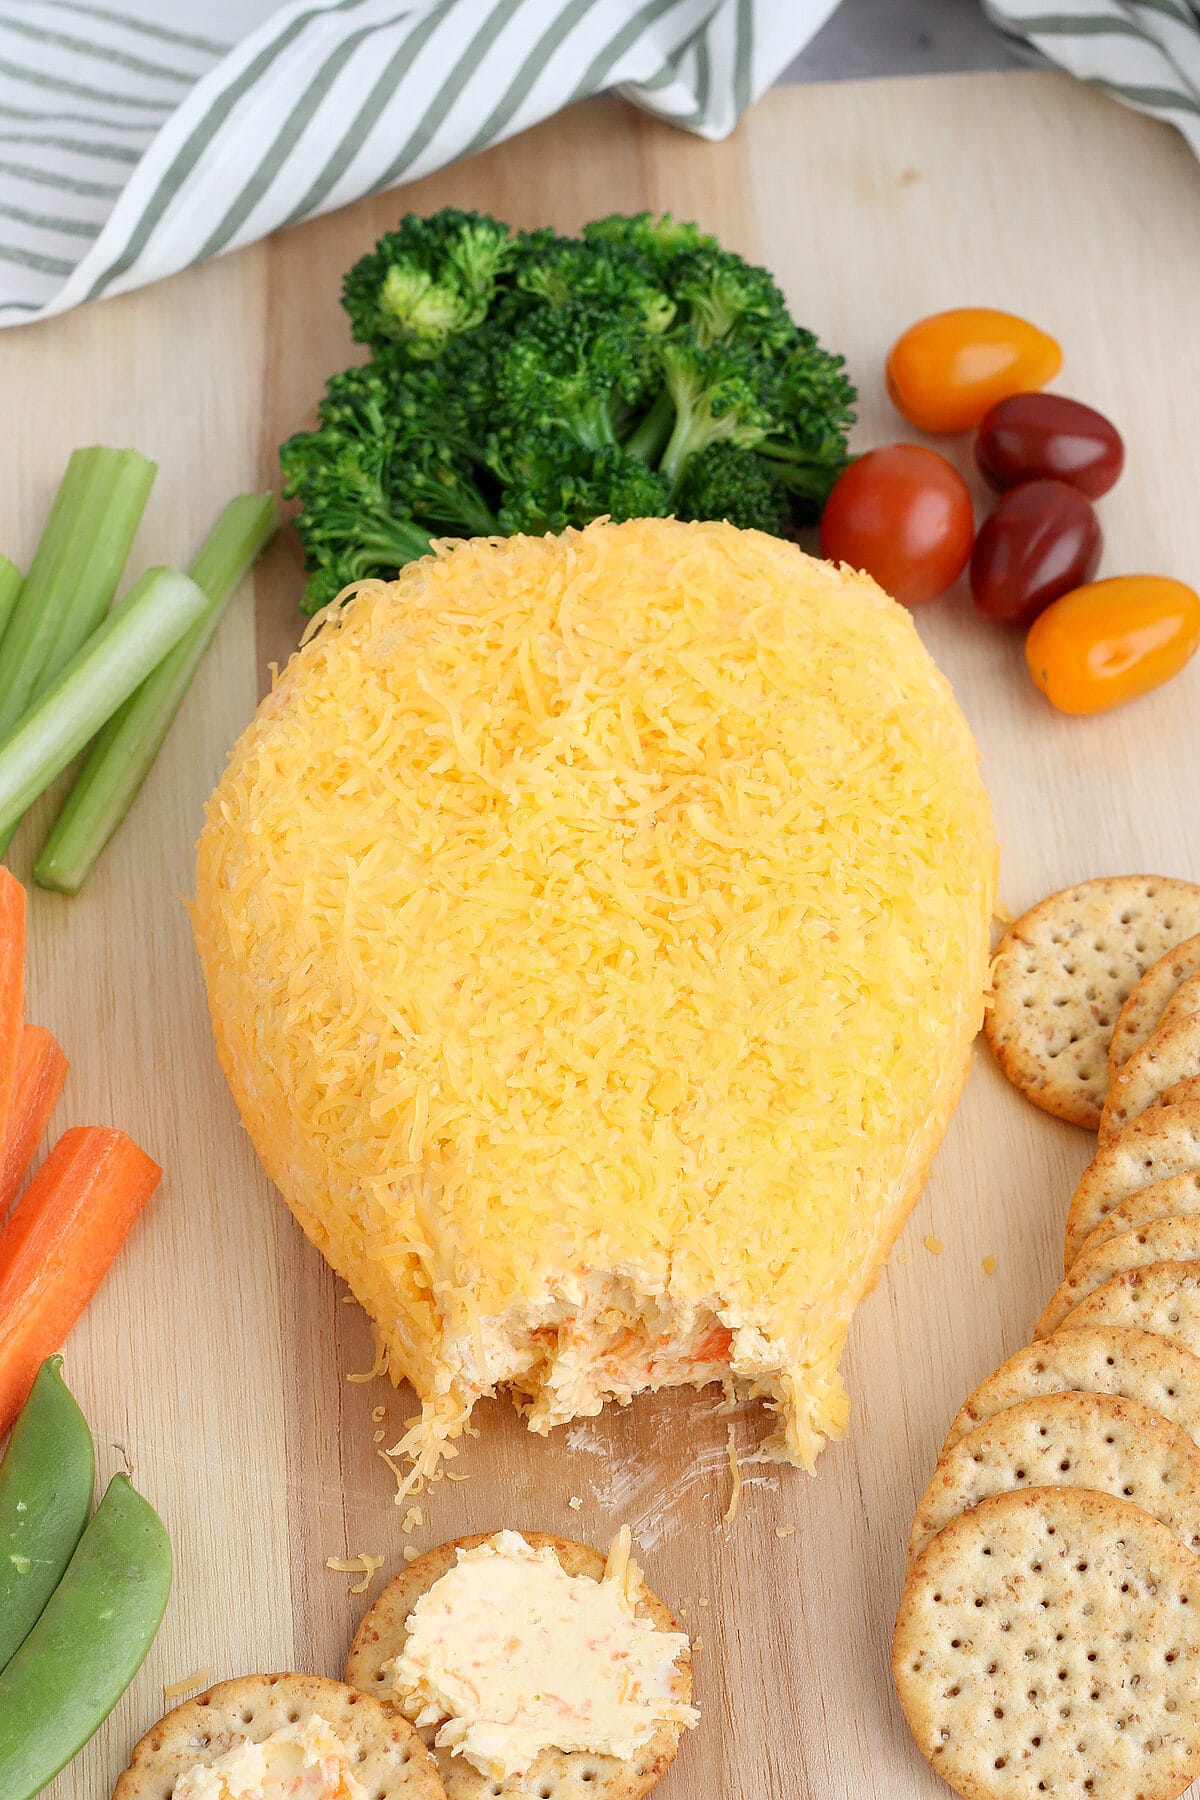 a cheeseball shaped like a carrot with crackers and vegetables